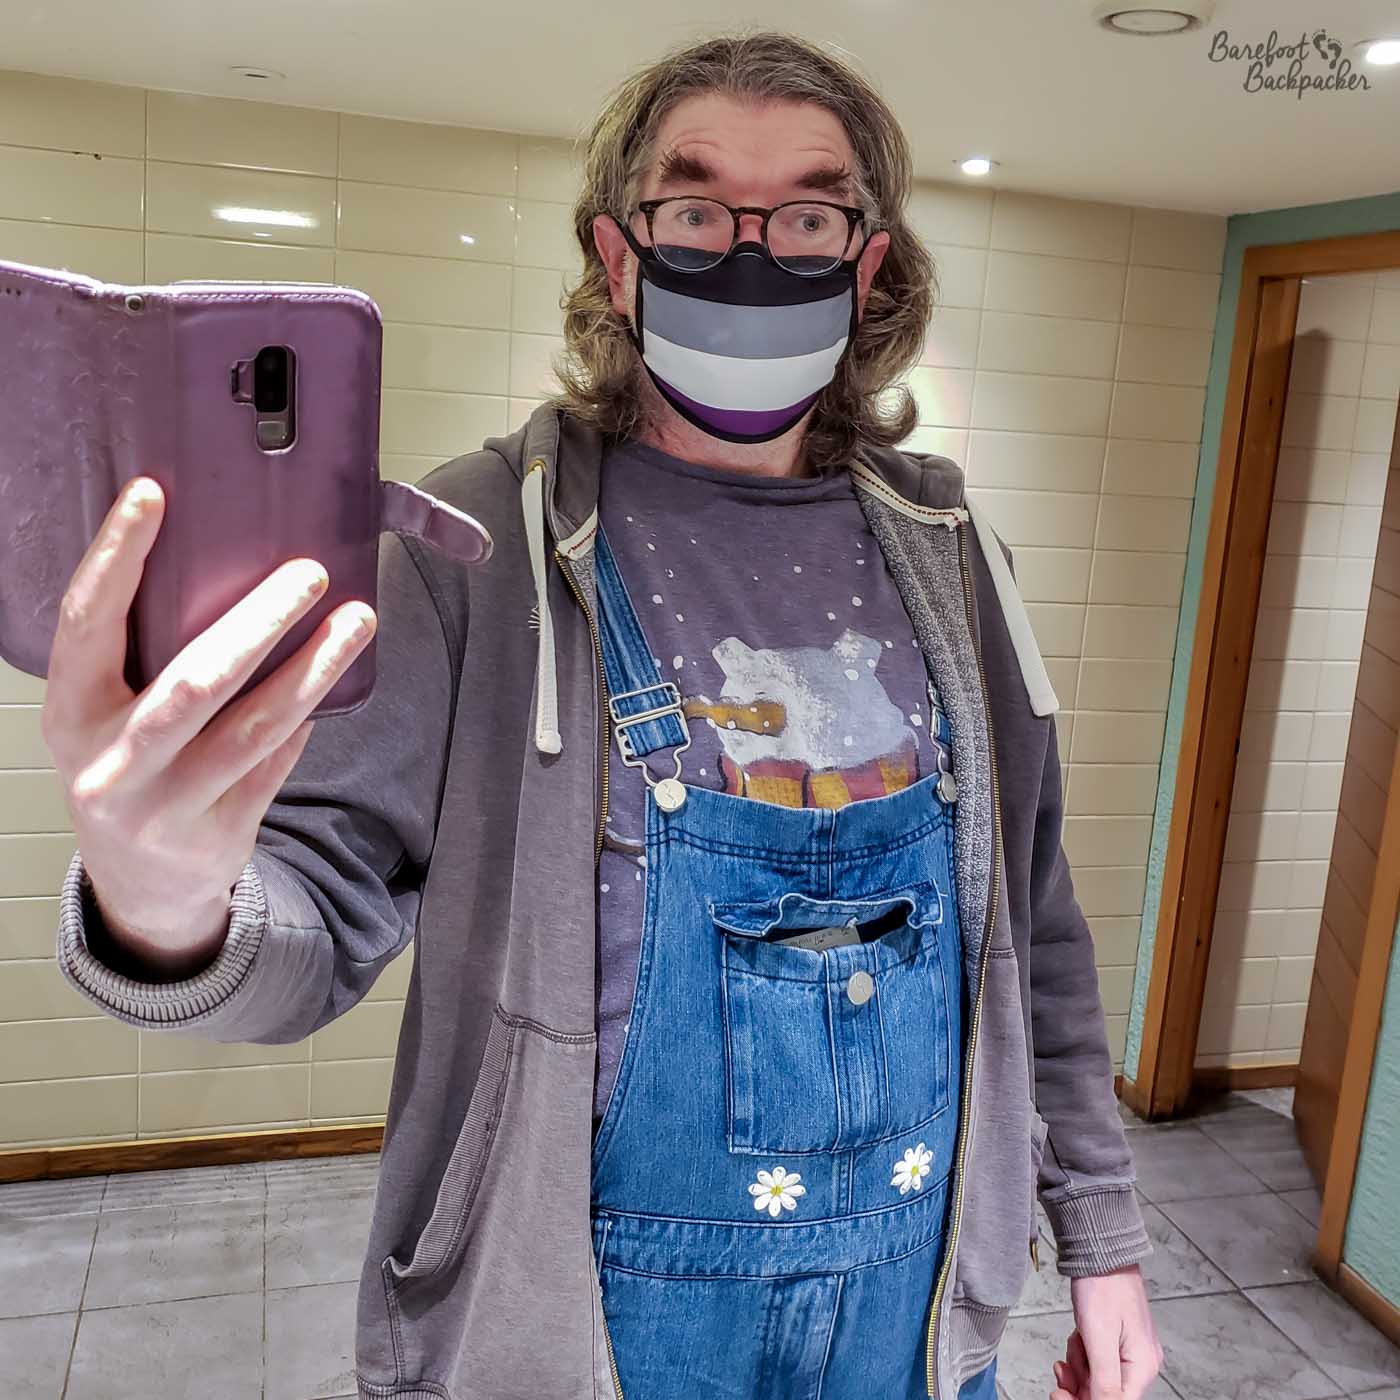 A person is stood in front of a ceramic tiled wall. They have a phone in their hand, held a bit away from their body, but they are looking almost at the camera not at the phone. They are wearing a hoodie that's zipped open, denim dungarees with a couple of daisies, a t-shirt, and an asexual pride facemask.